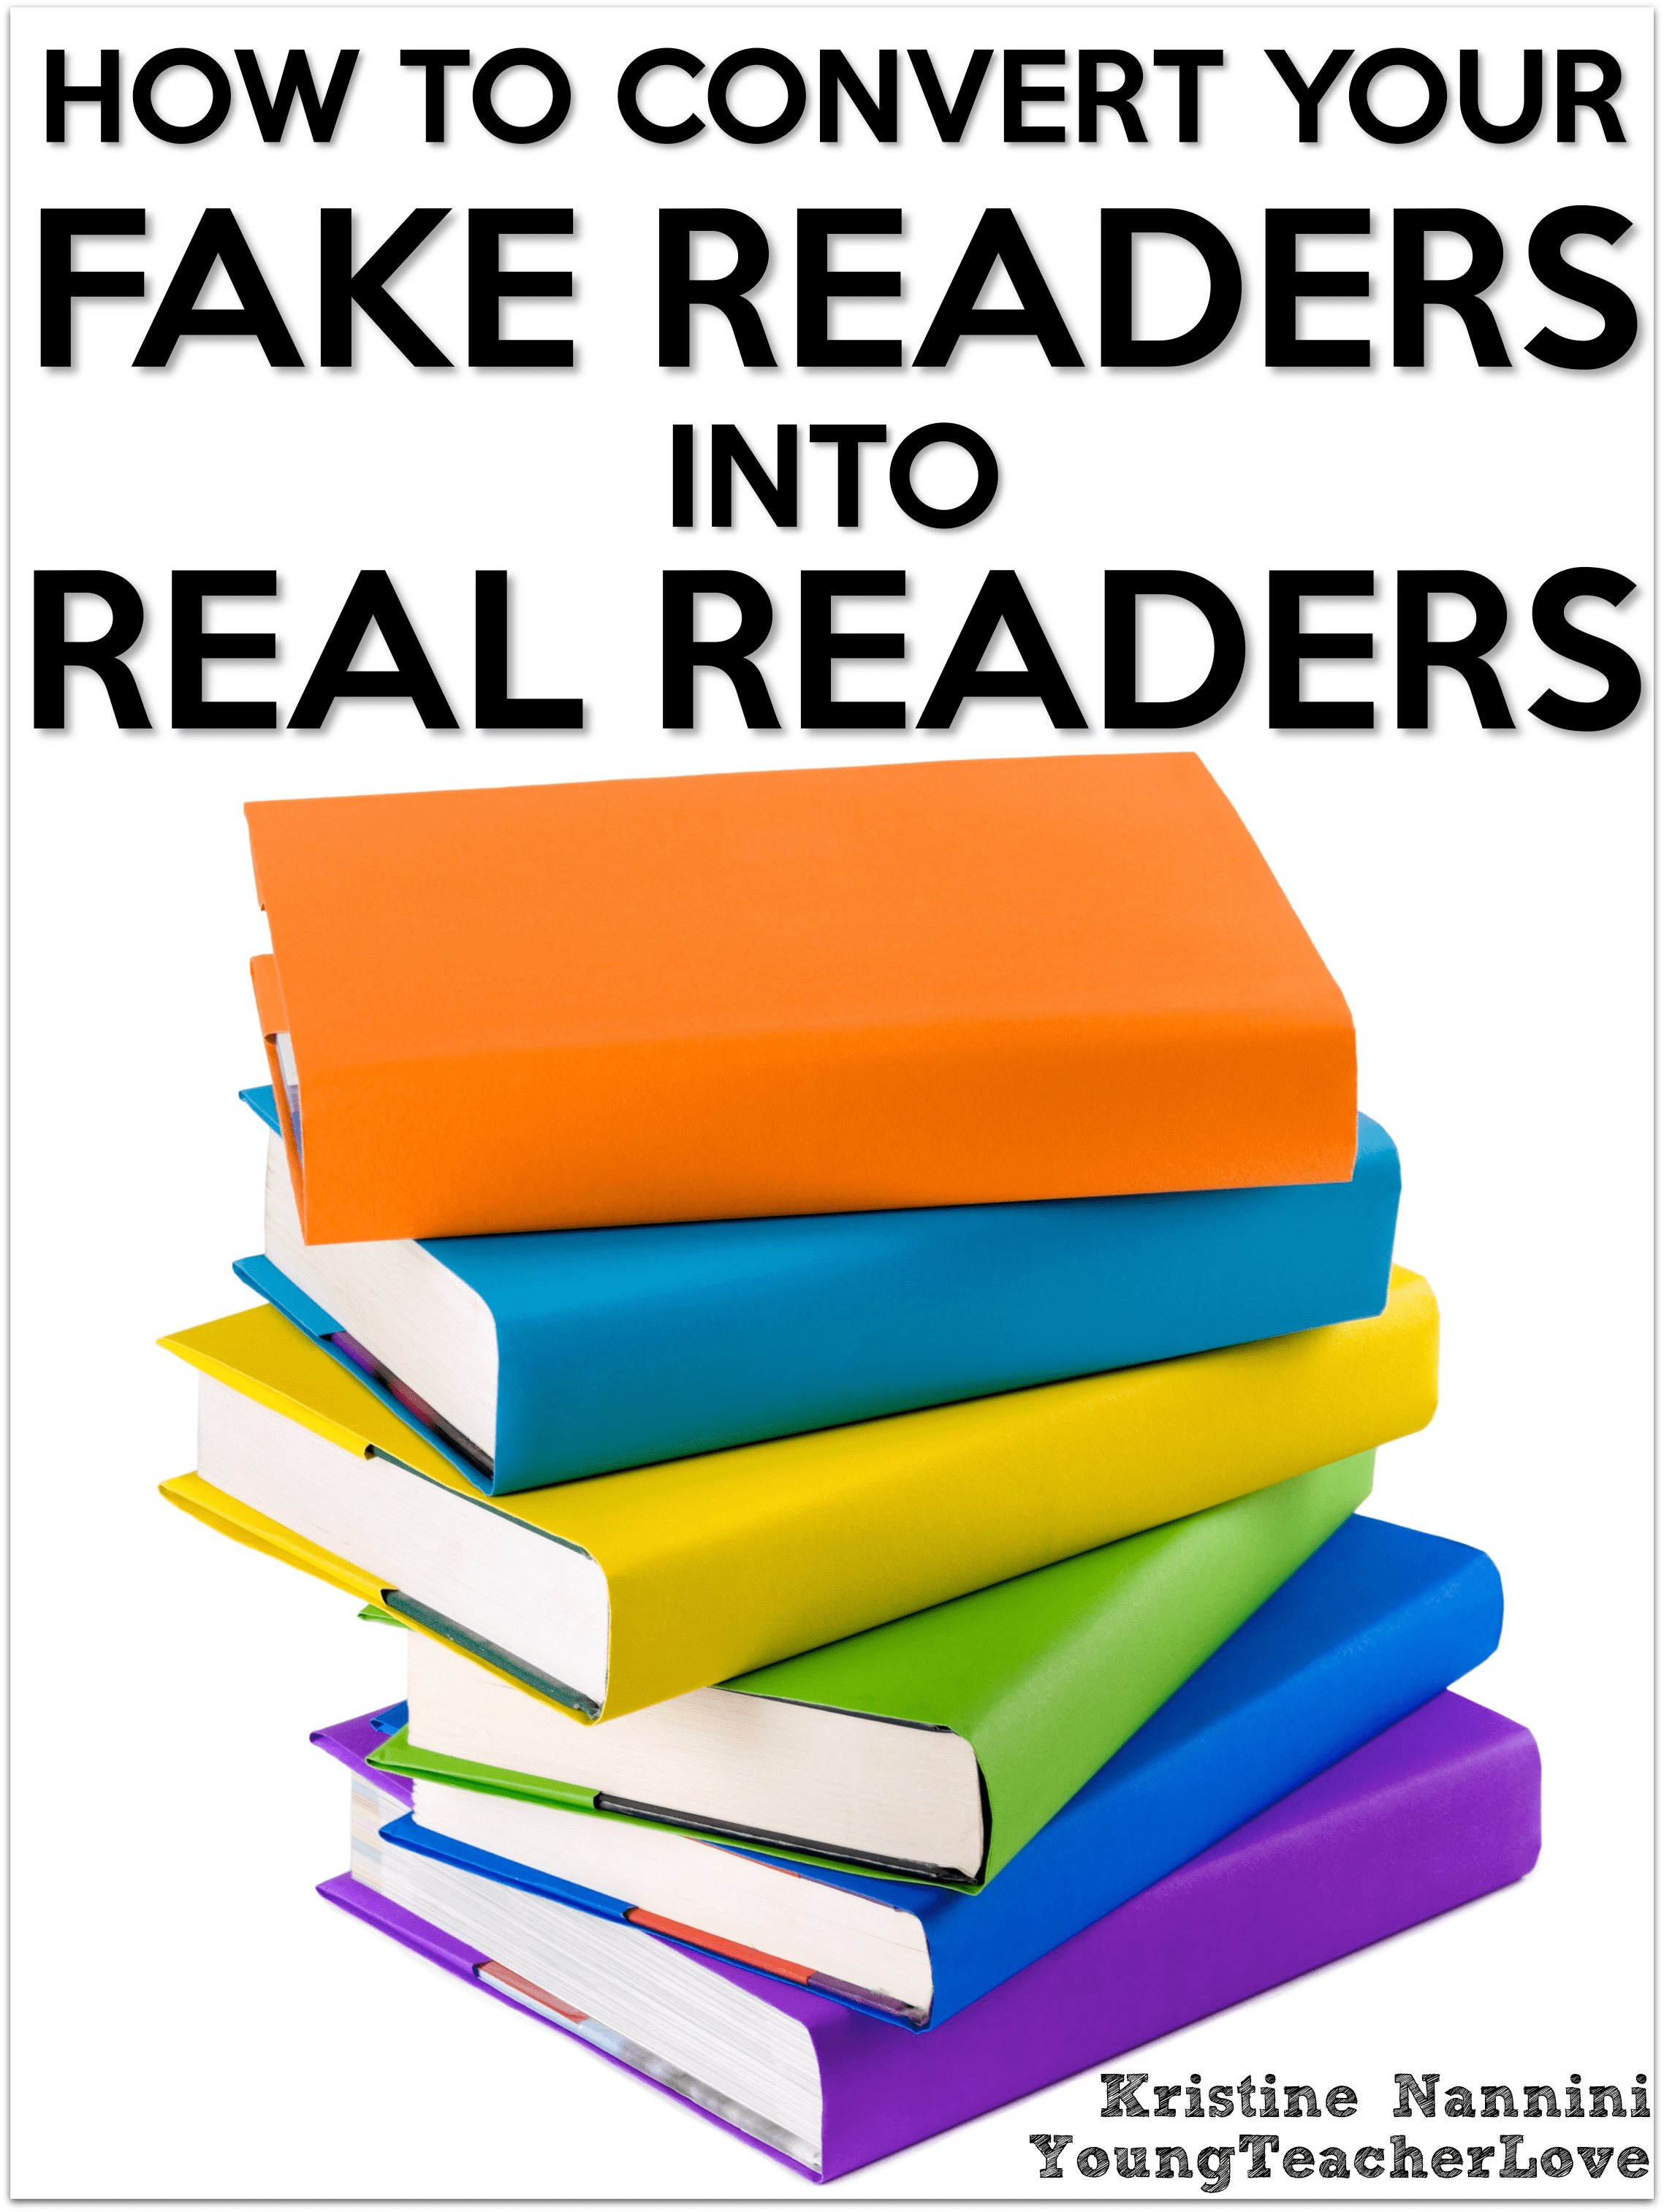 How To Convert Fake Readers Into Real Readers - Young Teacher Love by Kristine Nannini